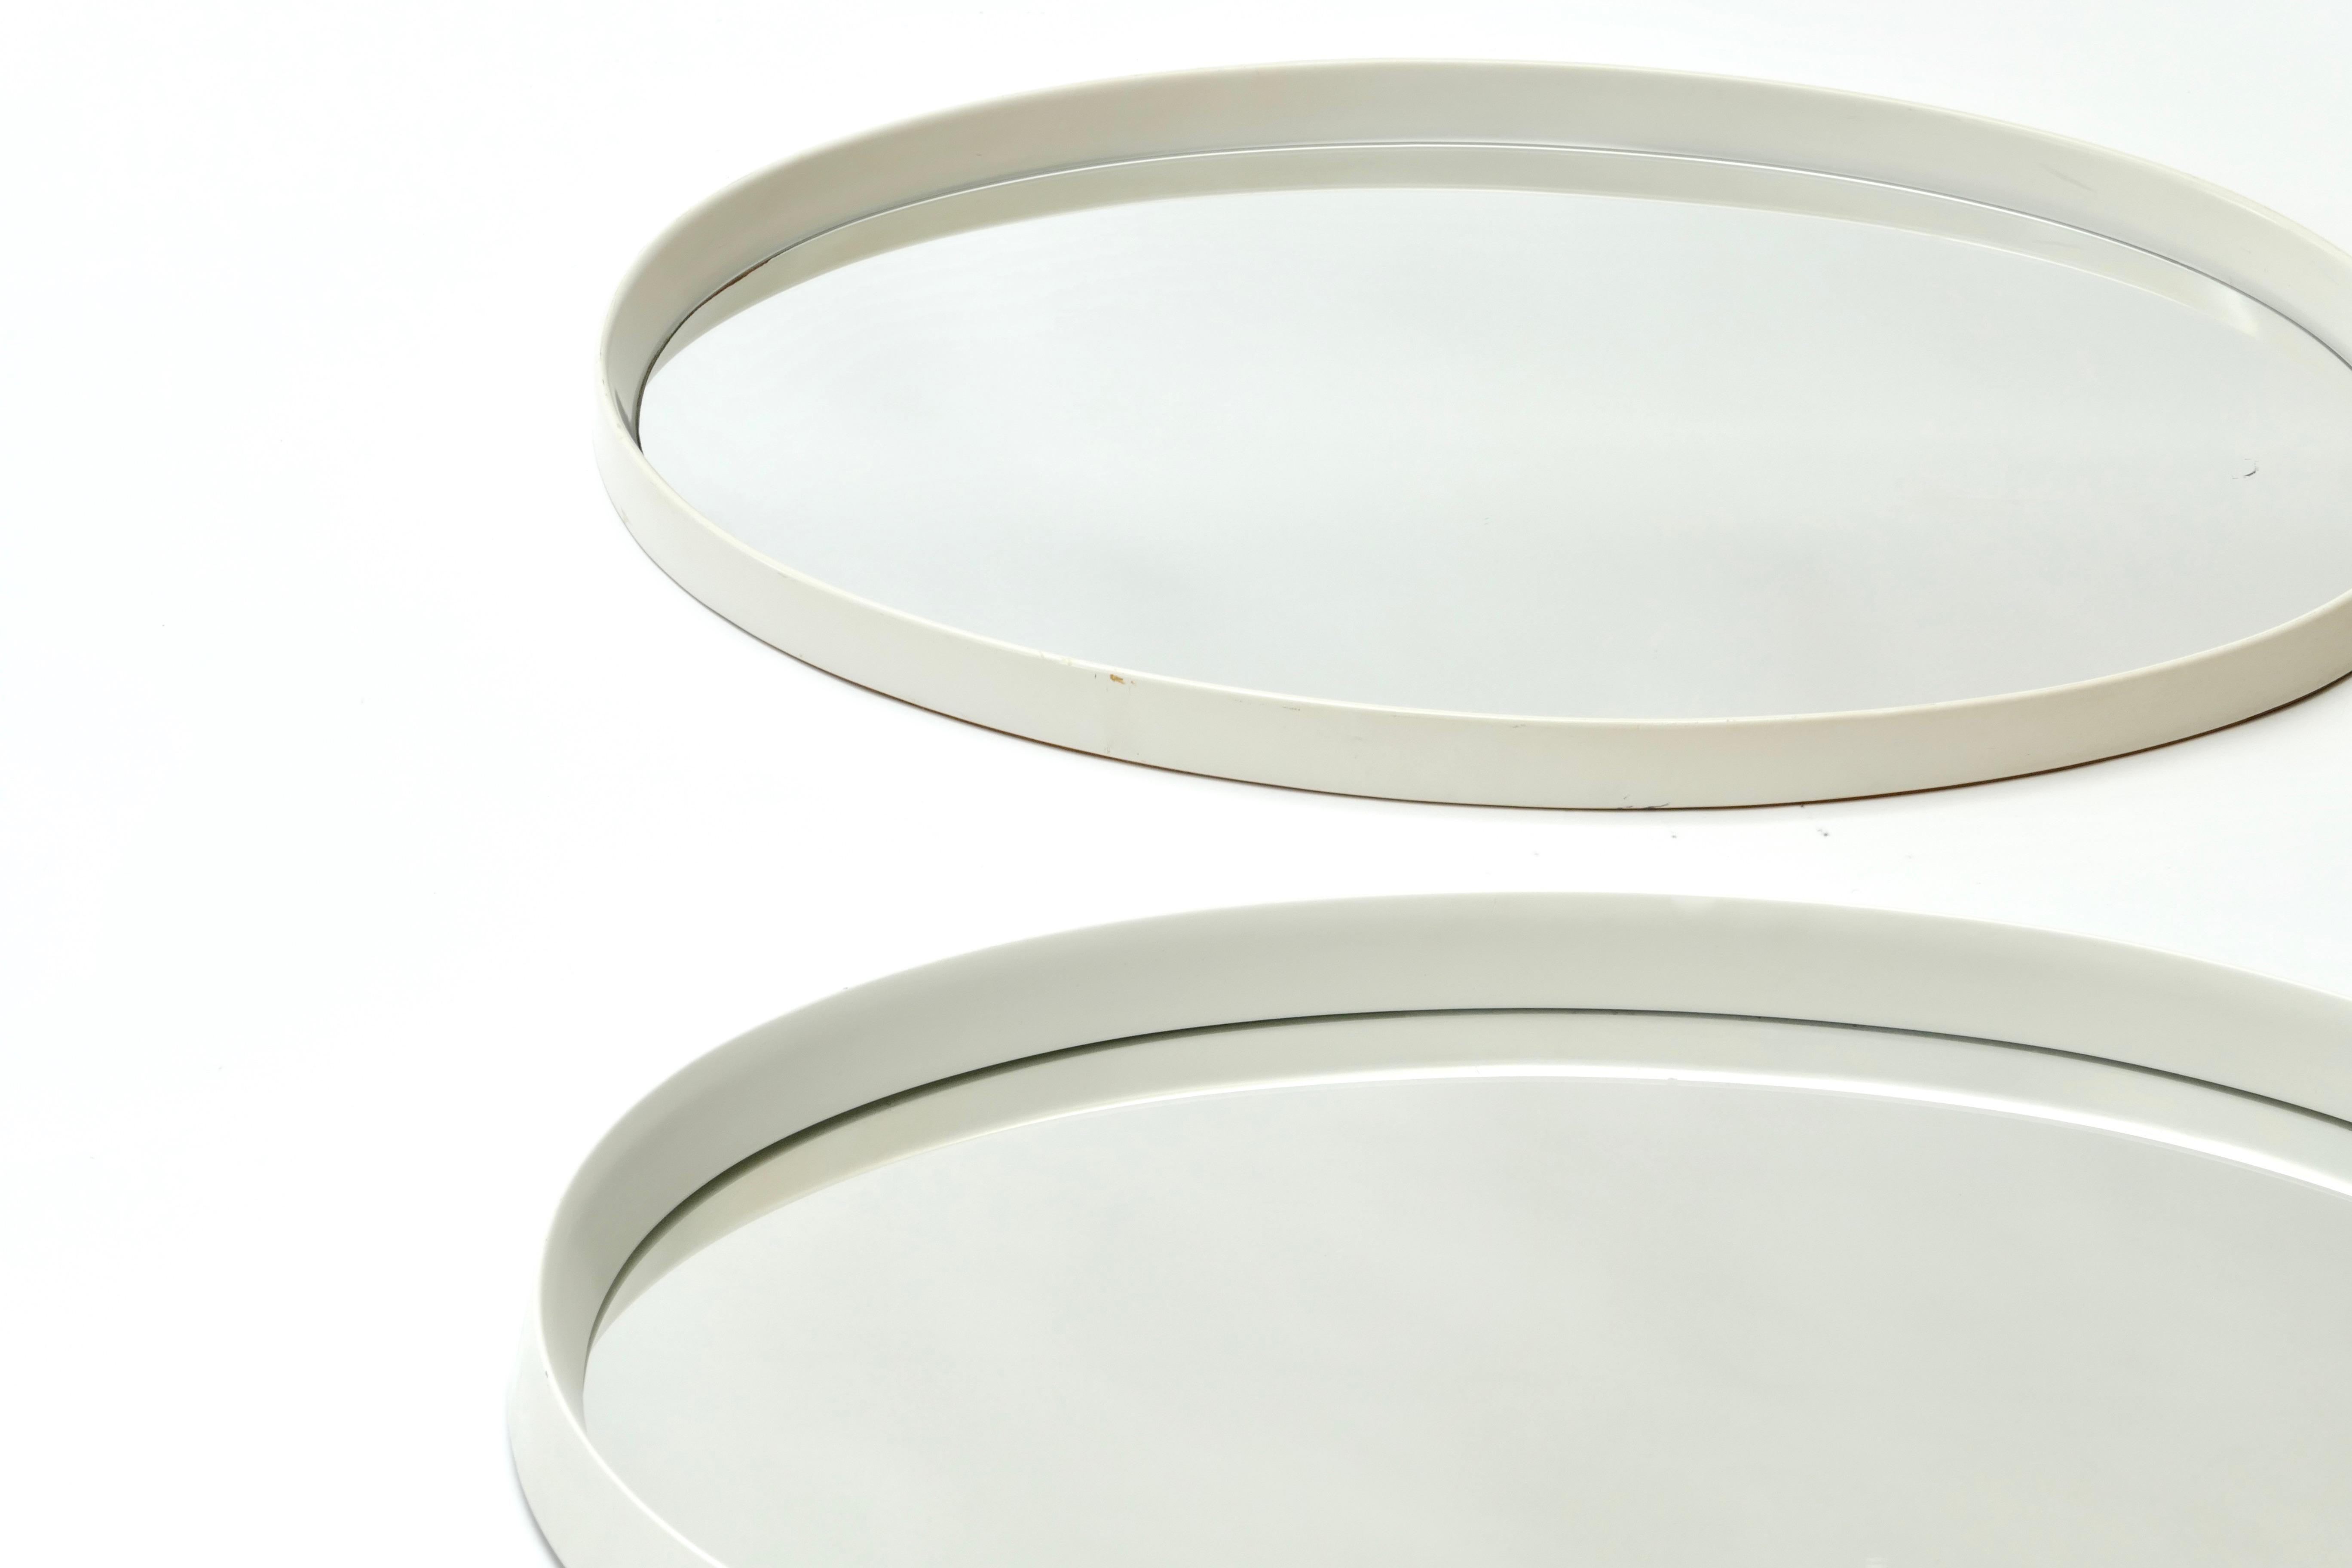 Minimalist Set of Two Oval Mirrors with a Wood White Lacquered Frame, Germany, 1970s